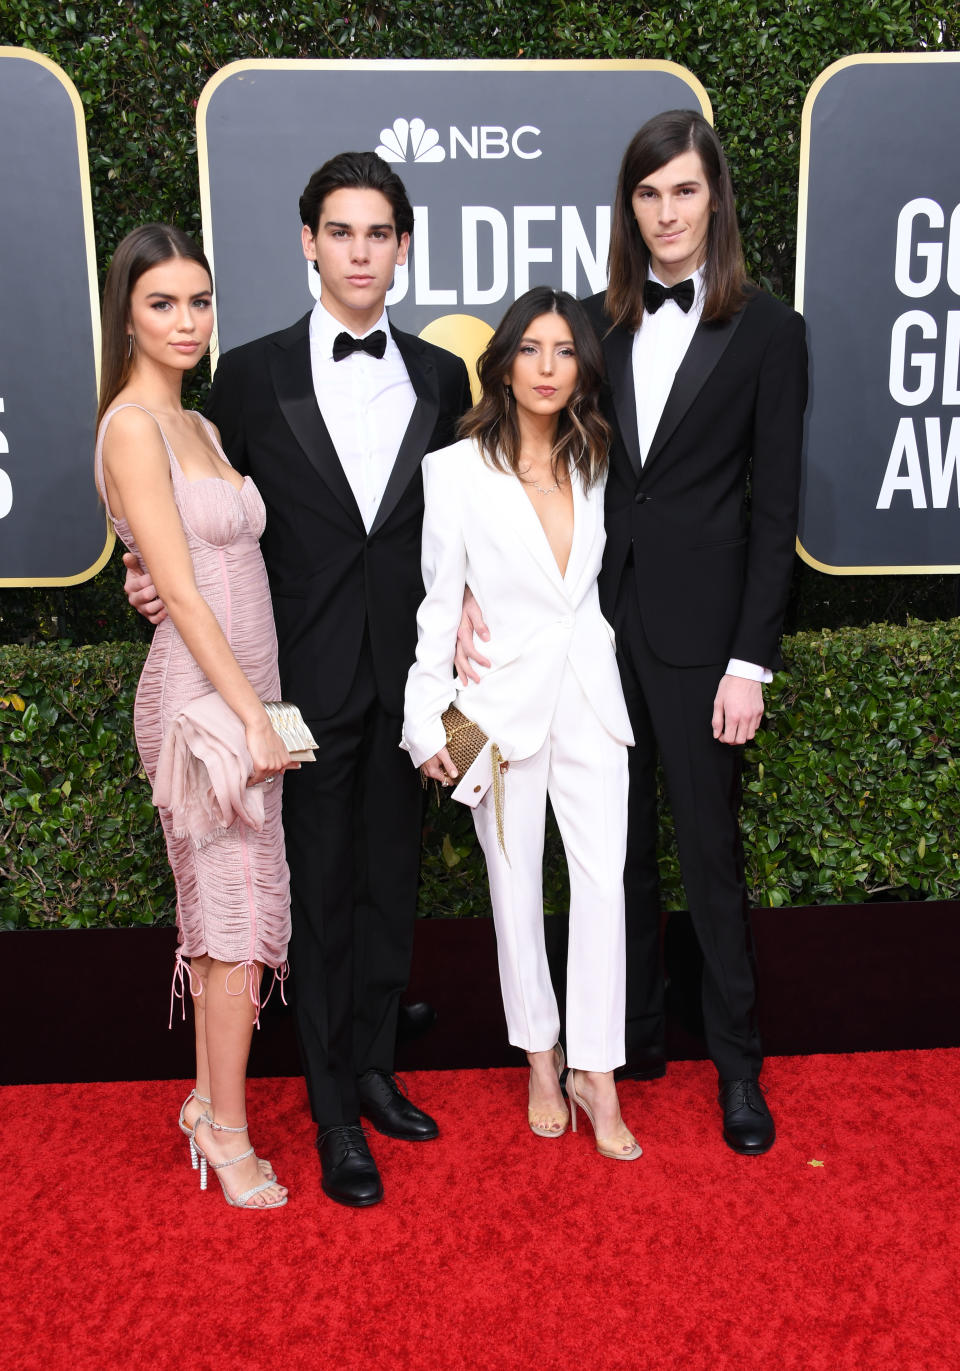 BEVERLY HILLS, CALIFORNIA - JANUARY 05: (L-R) Paris Brosnan (2ndL) and brother Dylan Brosnan and girlfriends attend the 77th Annual Golden Globe Awards at The Beverly Hilton Hotel on January 05, 2020 in Beverly Hills, California. (Photo by Jon Kopaloff/Getty Images)